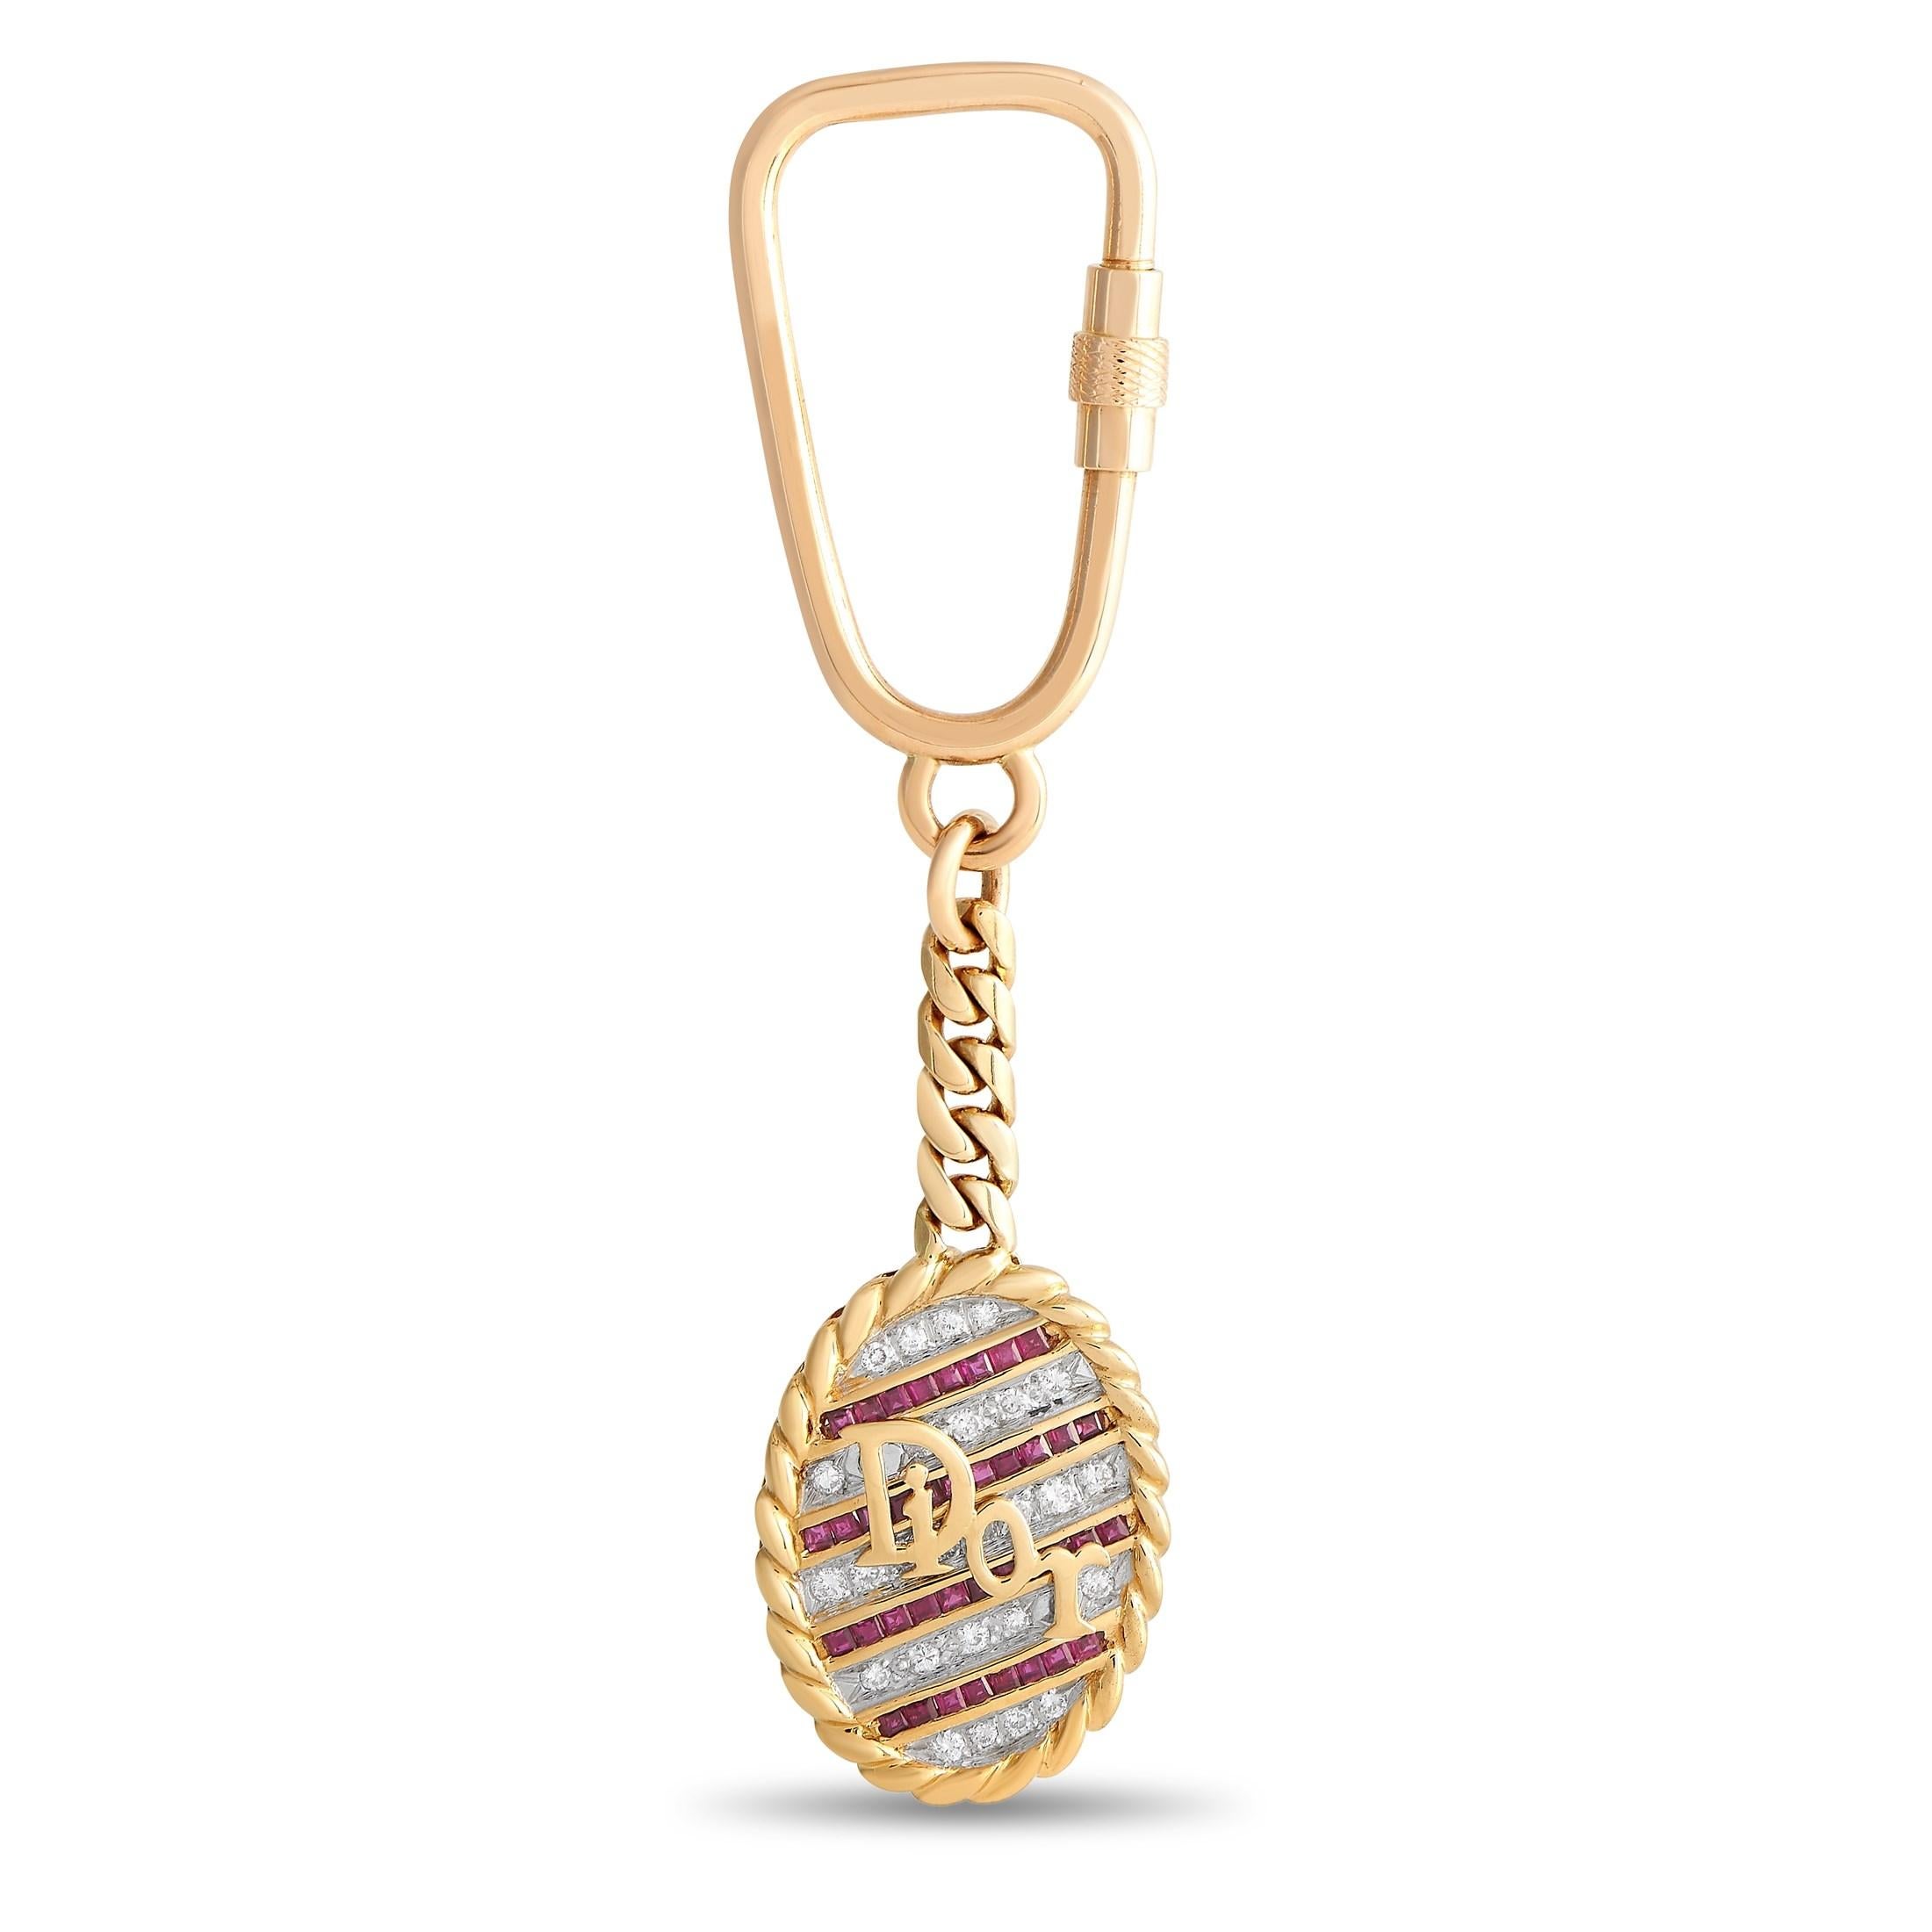 Add a touch of luxury to every day with this versatile Dior keychain. Perfect for carrying your keys or adding elegance to a handbag, it’s crafted from a combination of 18K Yellow Gold and 18K Rose Gold. Diamonds totaling 1.0 carats, rubies totaling